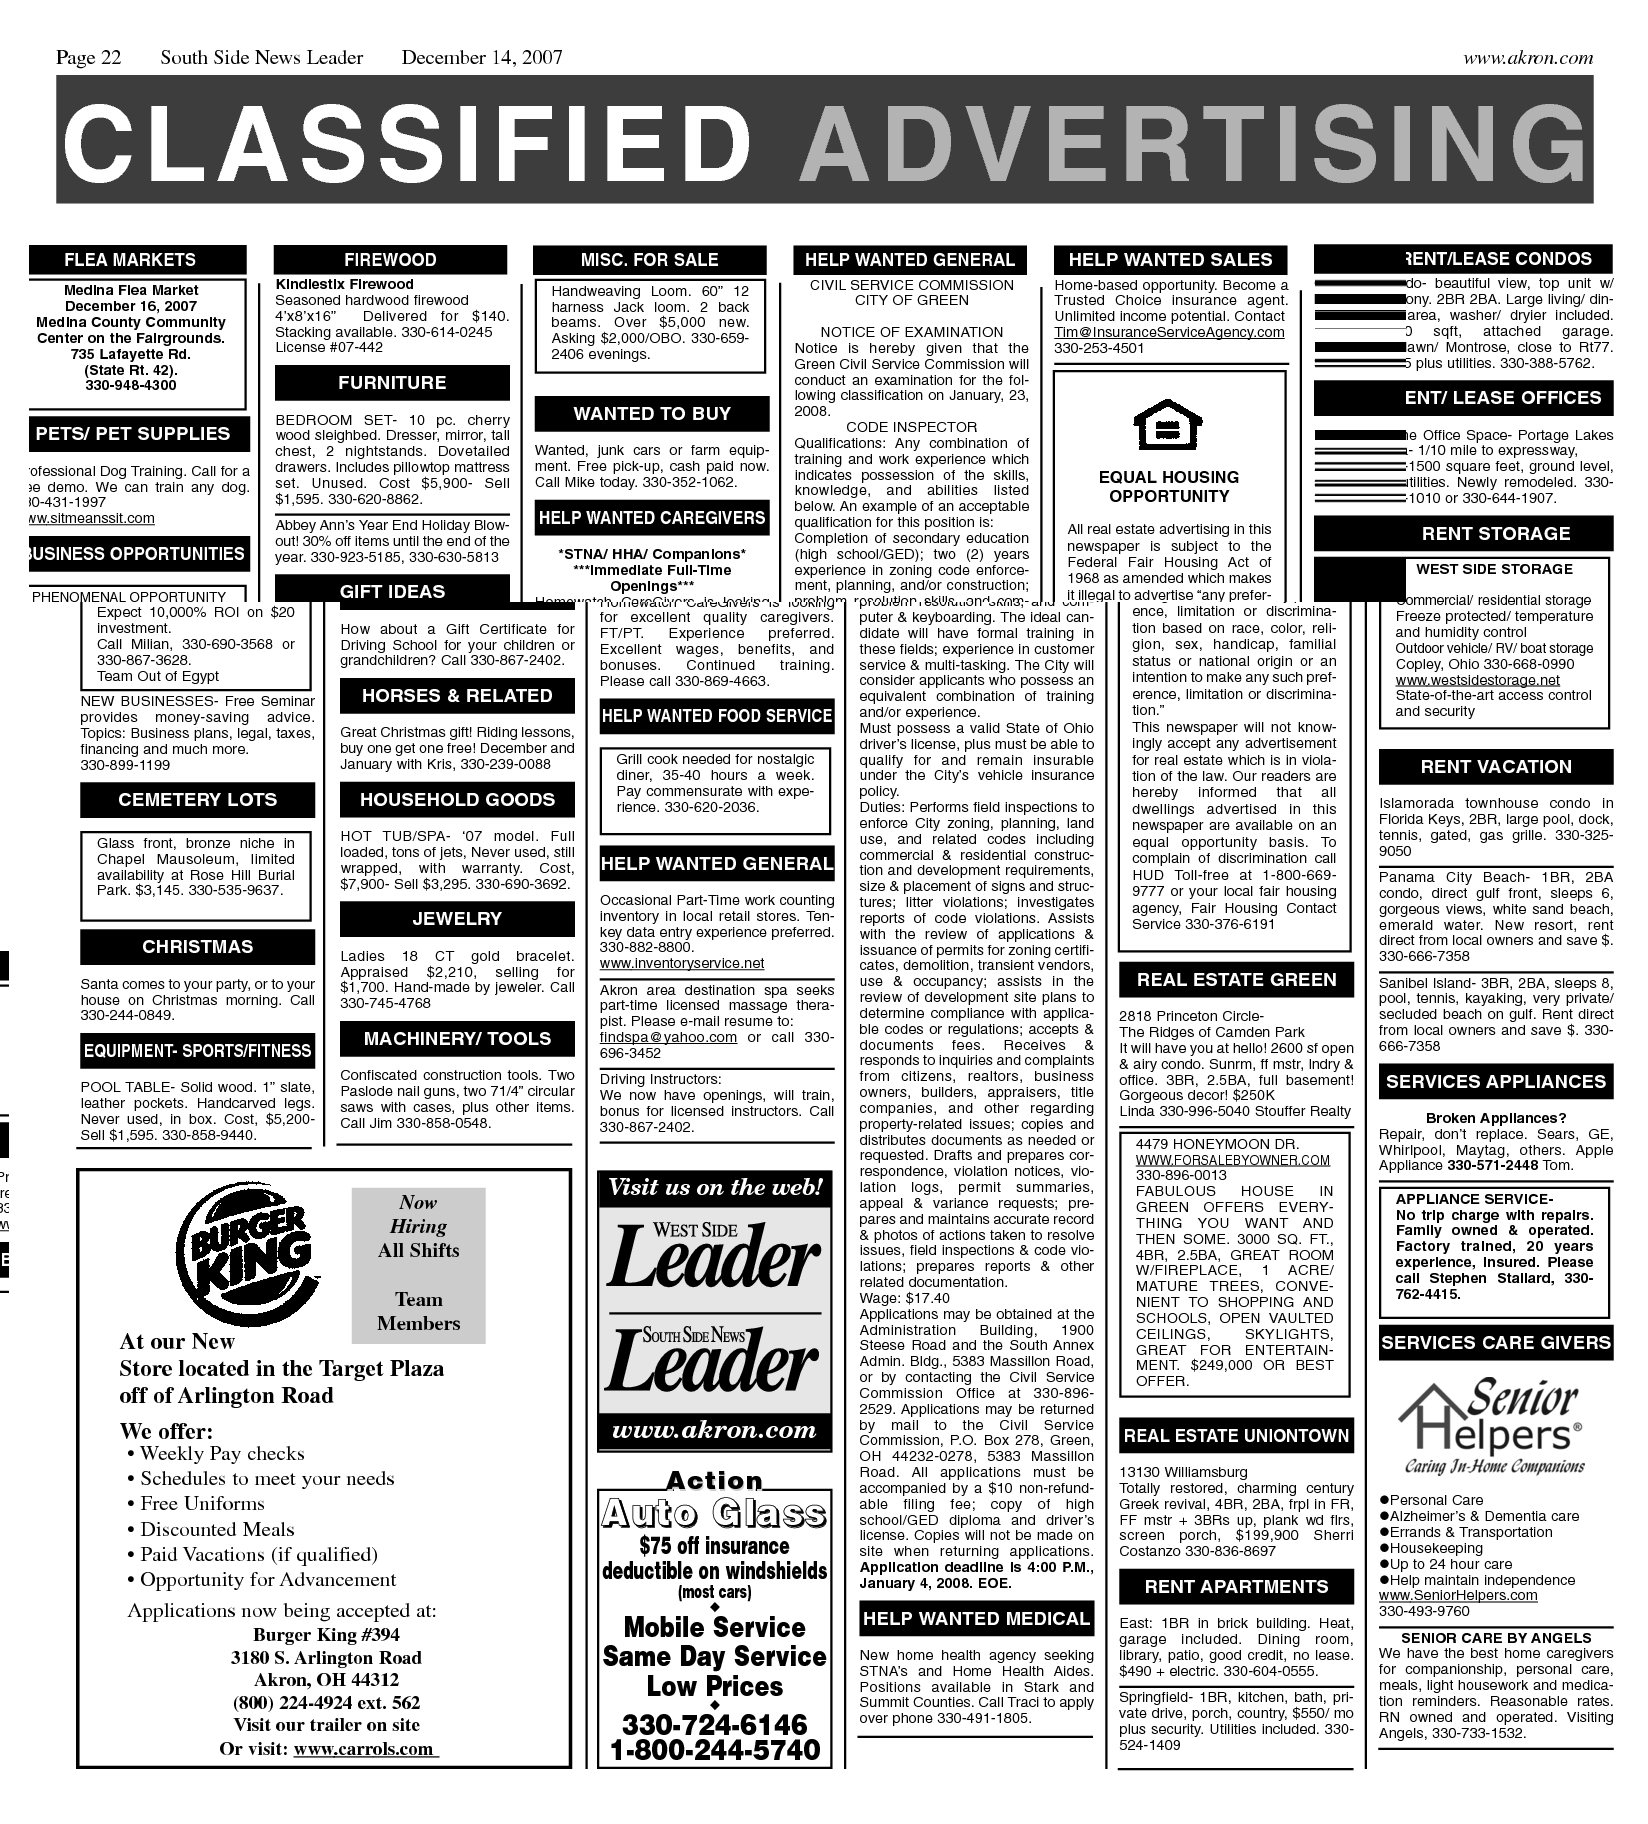 classified-text-travel-ad